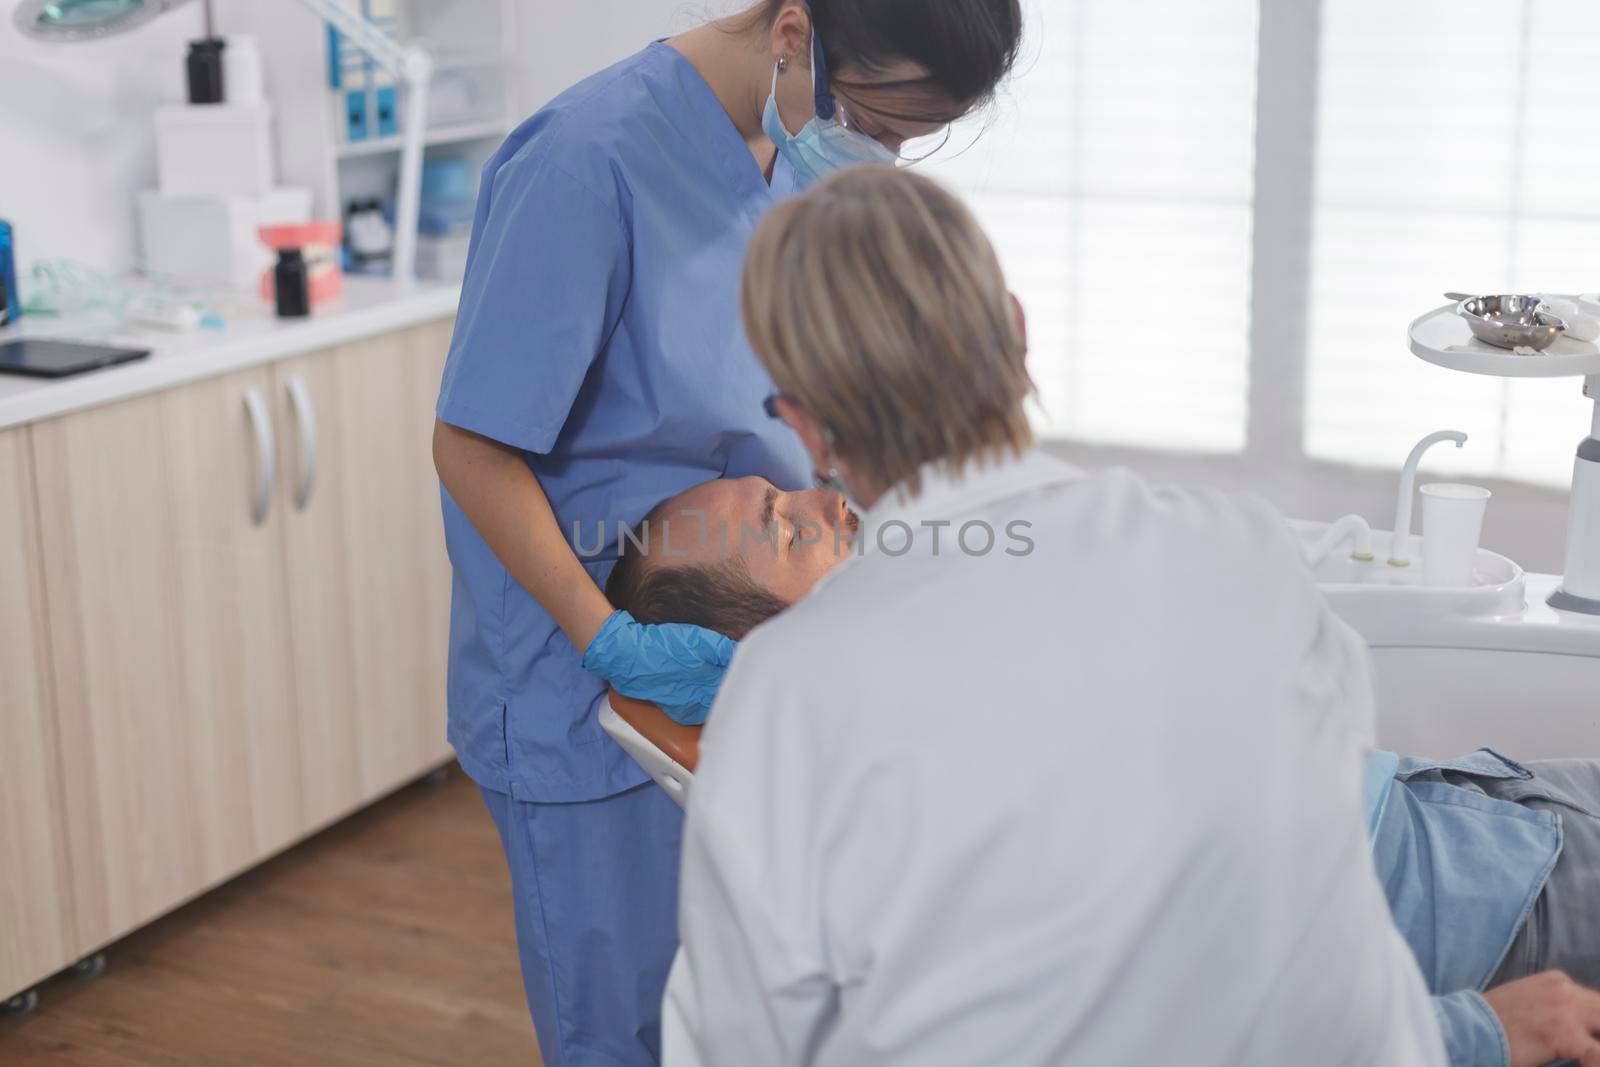 Clinical orthodontist team with face mask examining patient mouth during medical surgery in stomatological office room. Senior woman doctor using professional dentistry tools for cavity procedure